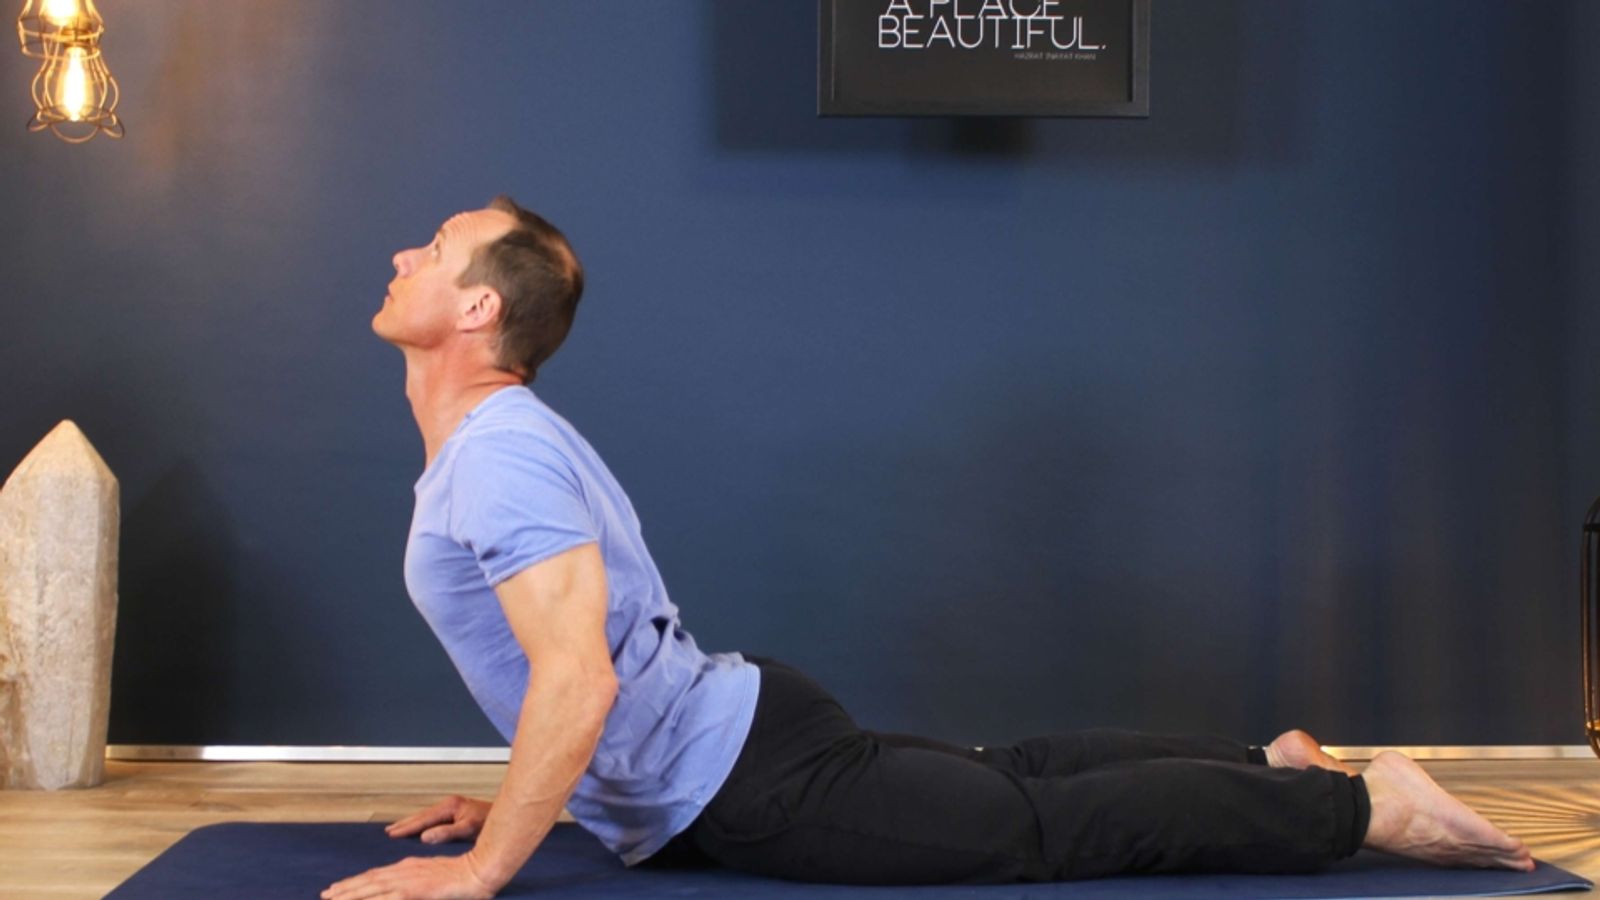 Booster sun salutation A - The classic also for beginners